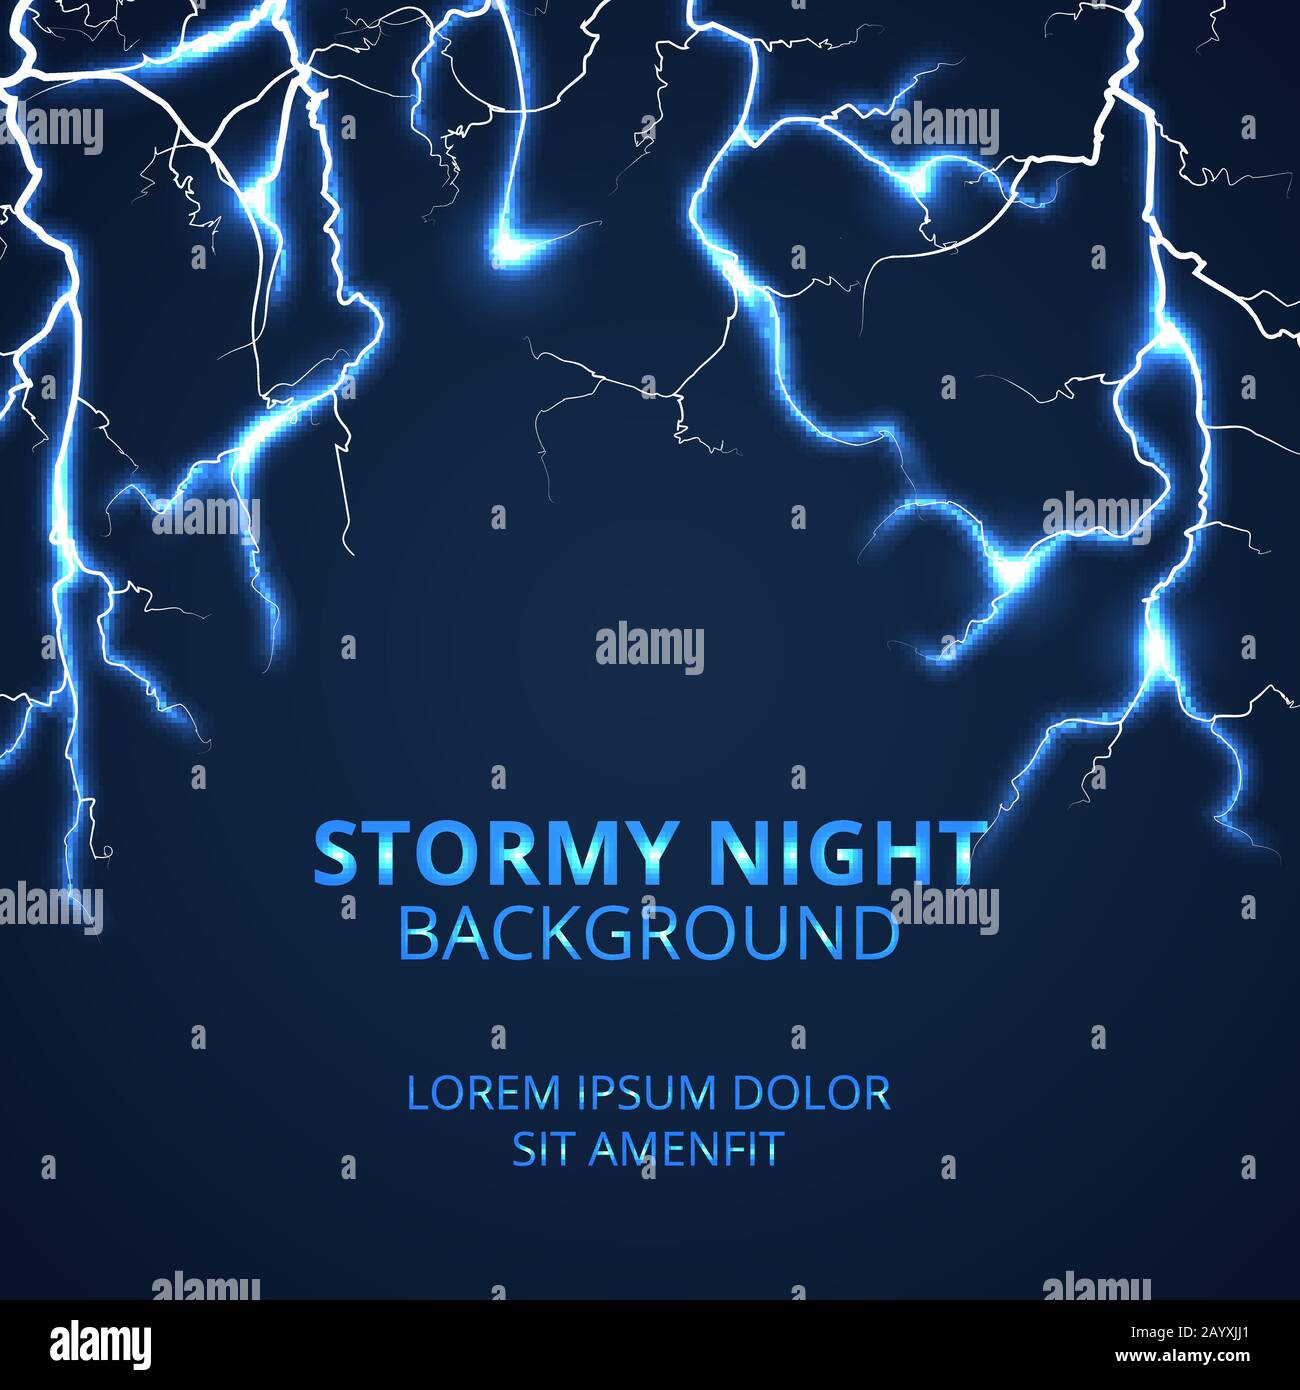 Stormy night with striking lightnings background. Electricity power and bright energy, vector illustration Stock Vector